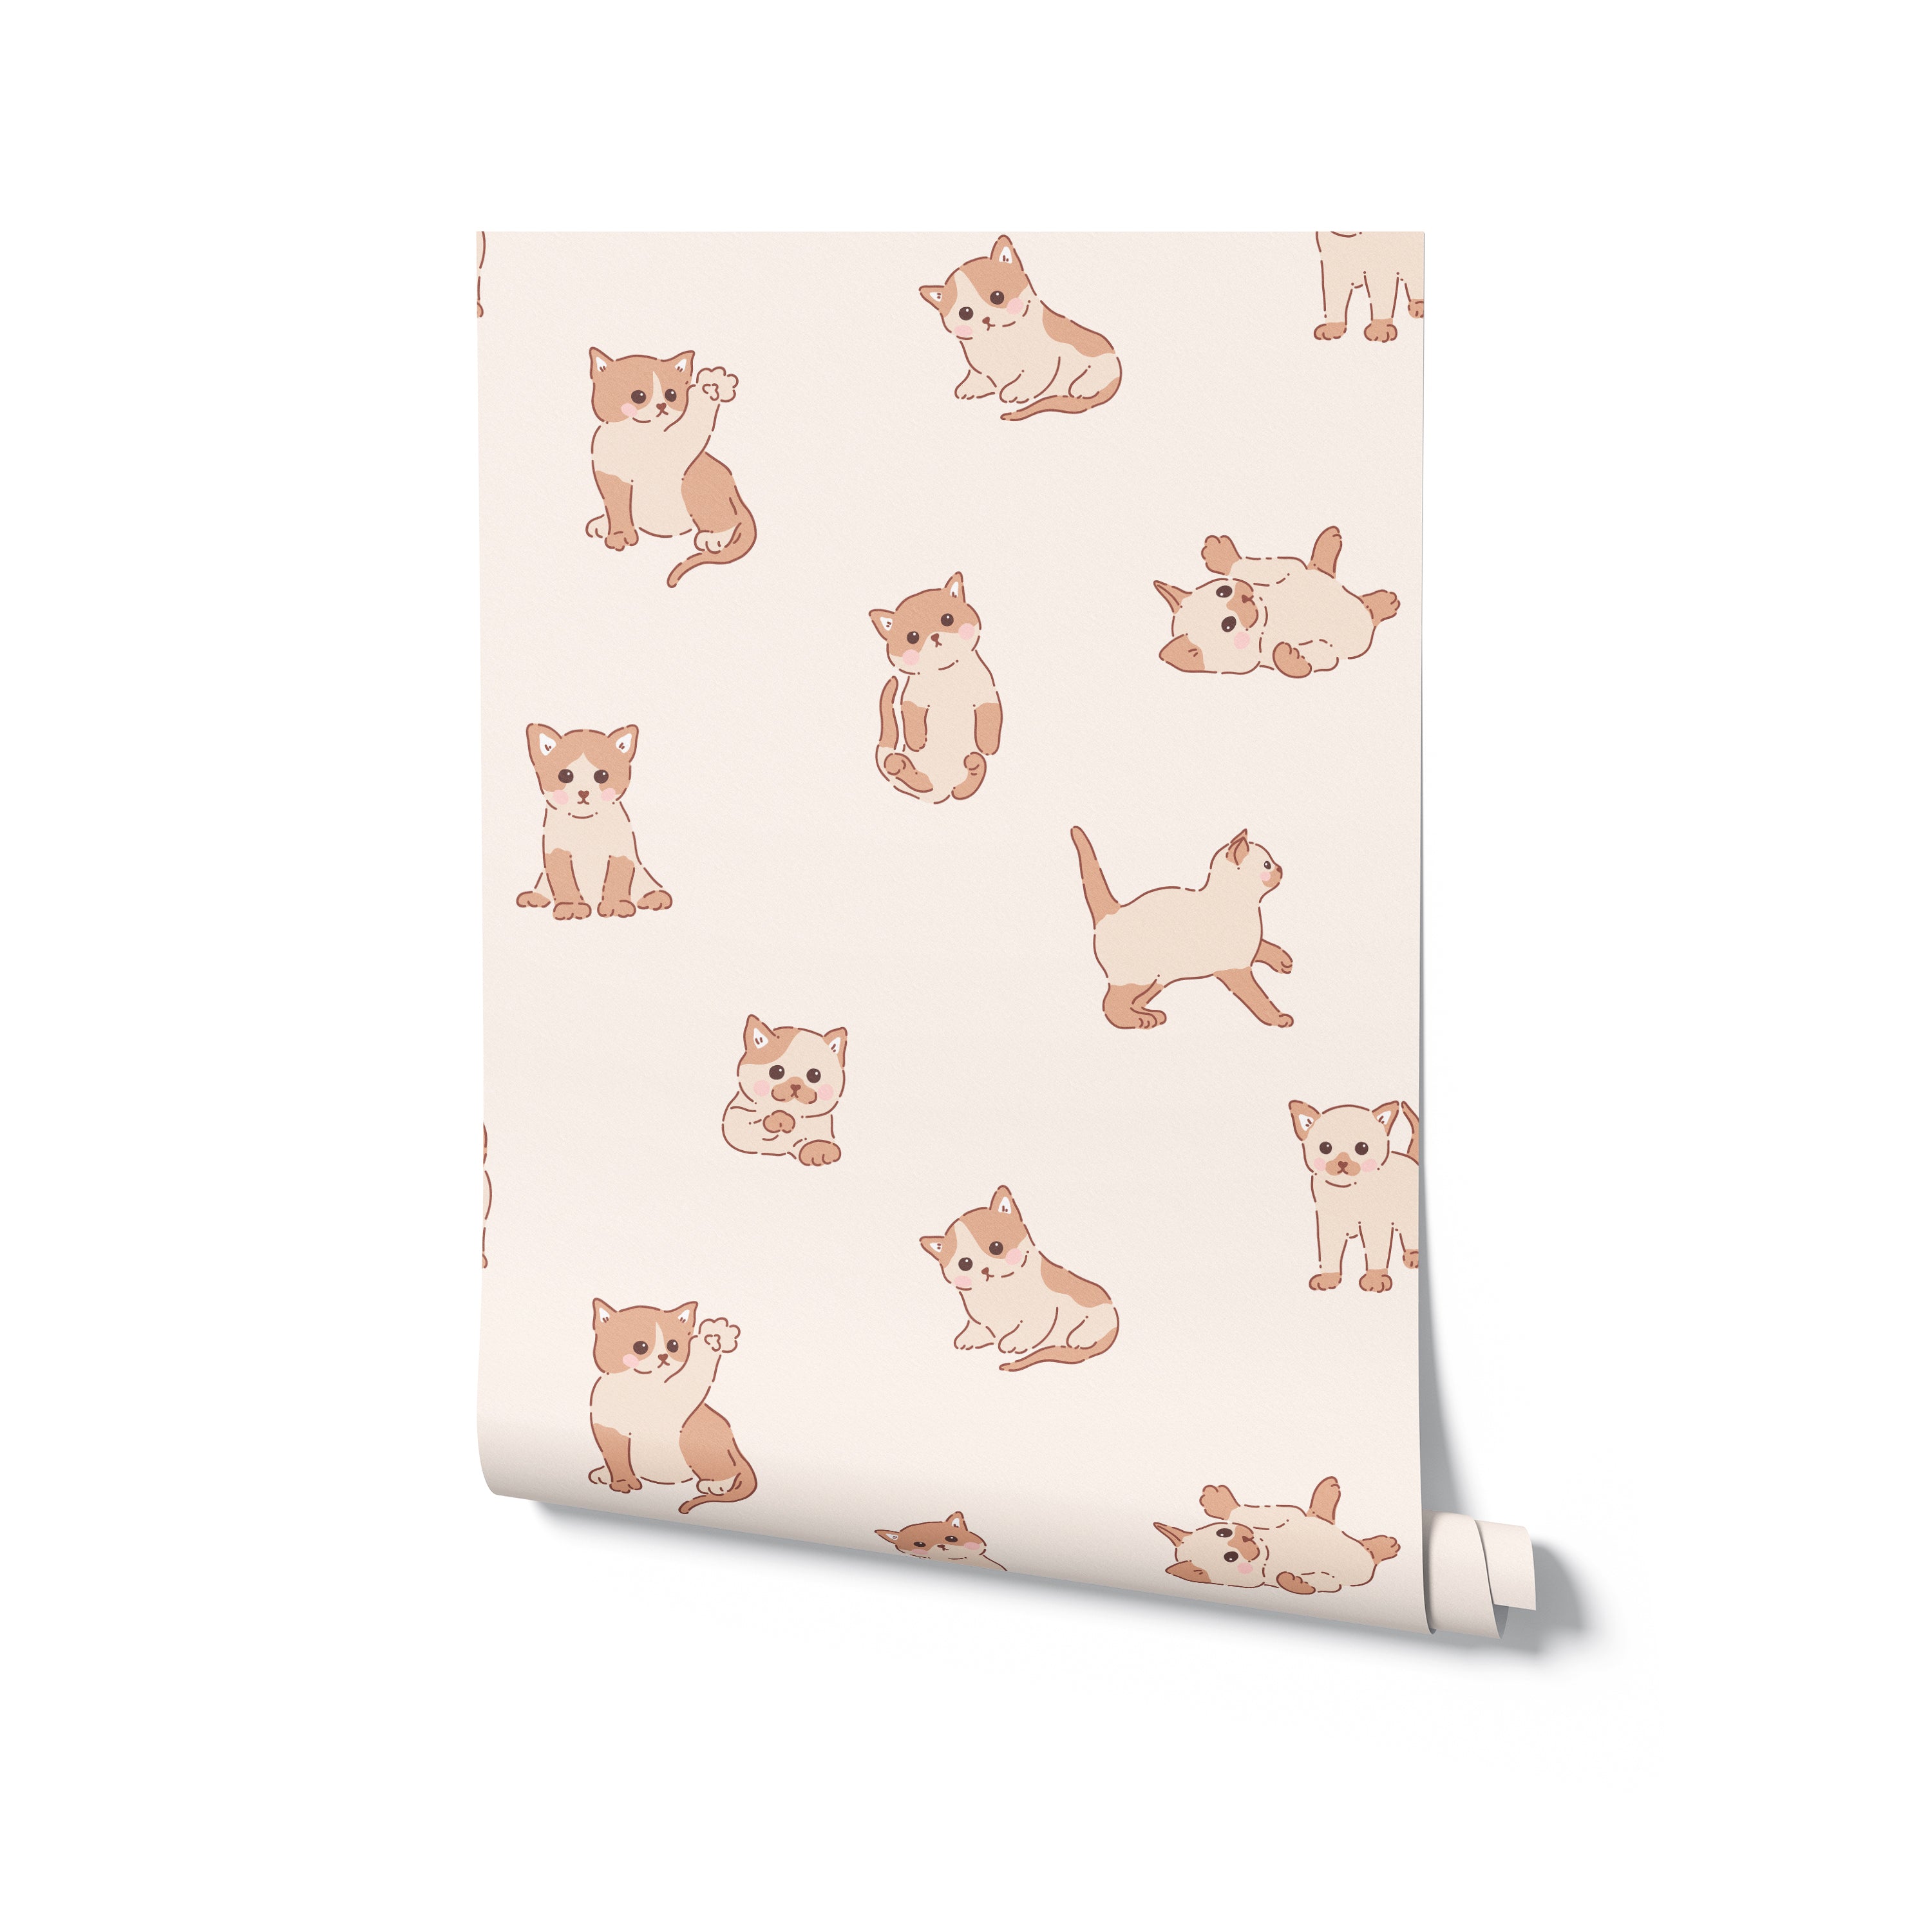 A roll of Chaton Wallpaper unfurled against a white background, depicting a series of cute beige and brown kittens in various playful poses on a soft peach background, perfect for adding a touch of playful charm to any room.